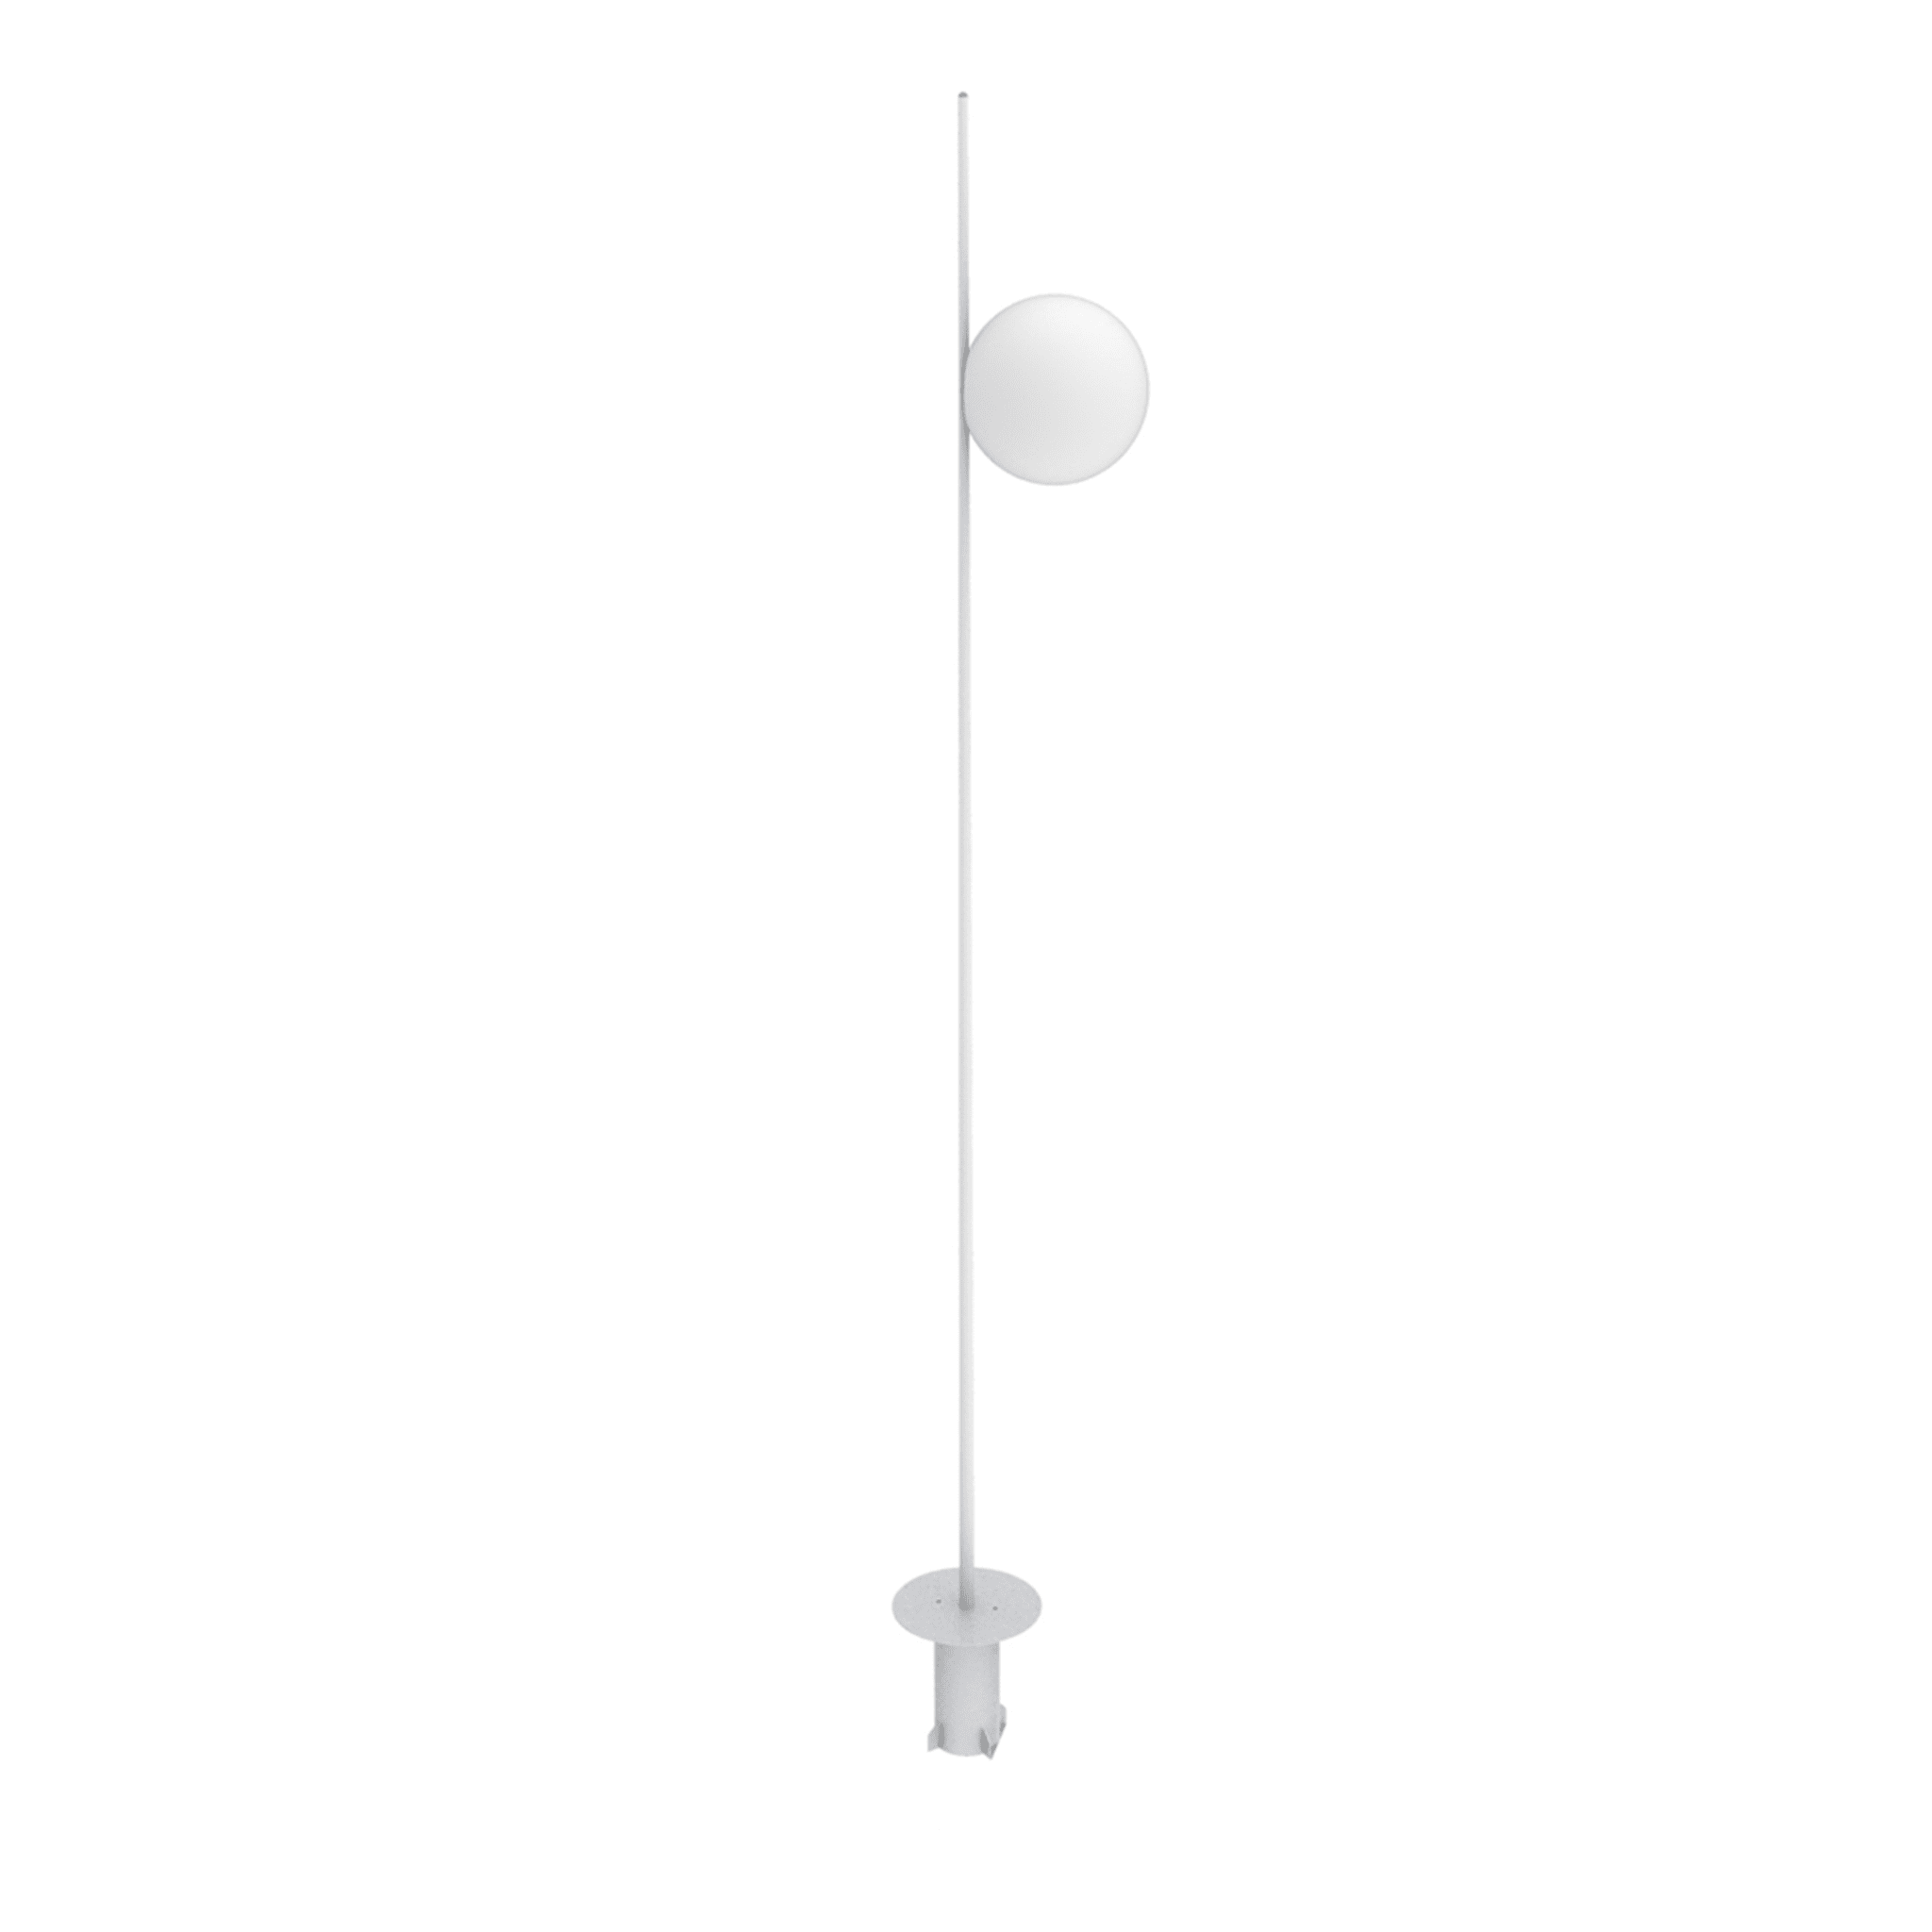 Atmosphere White Small Outdoor Floor Lamp #2 - Main view